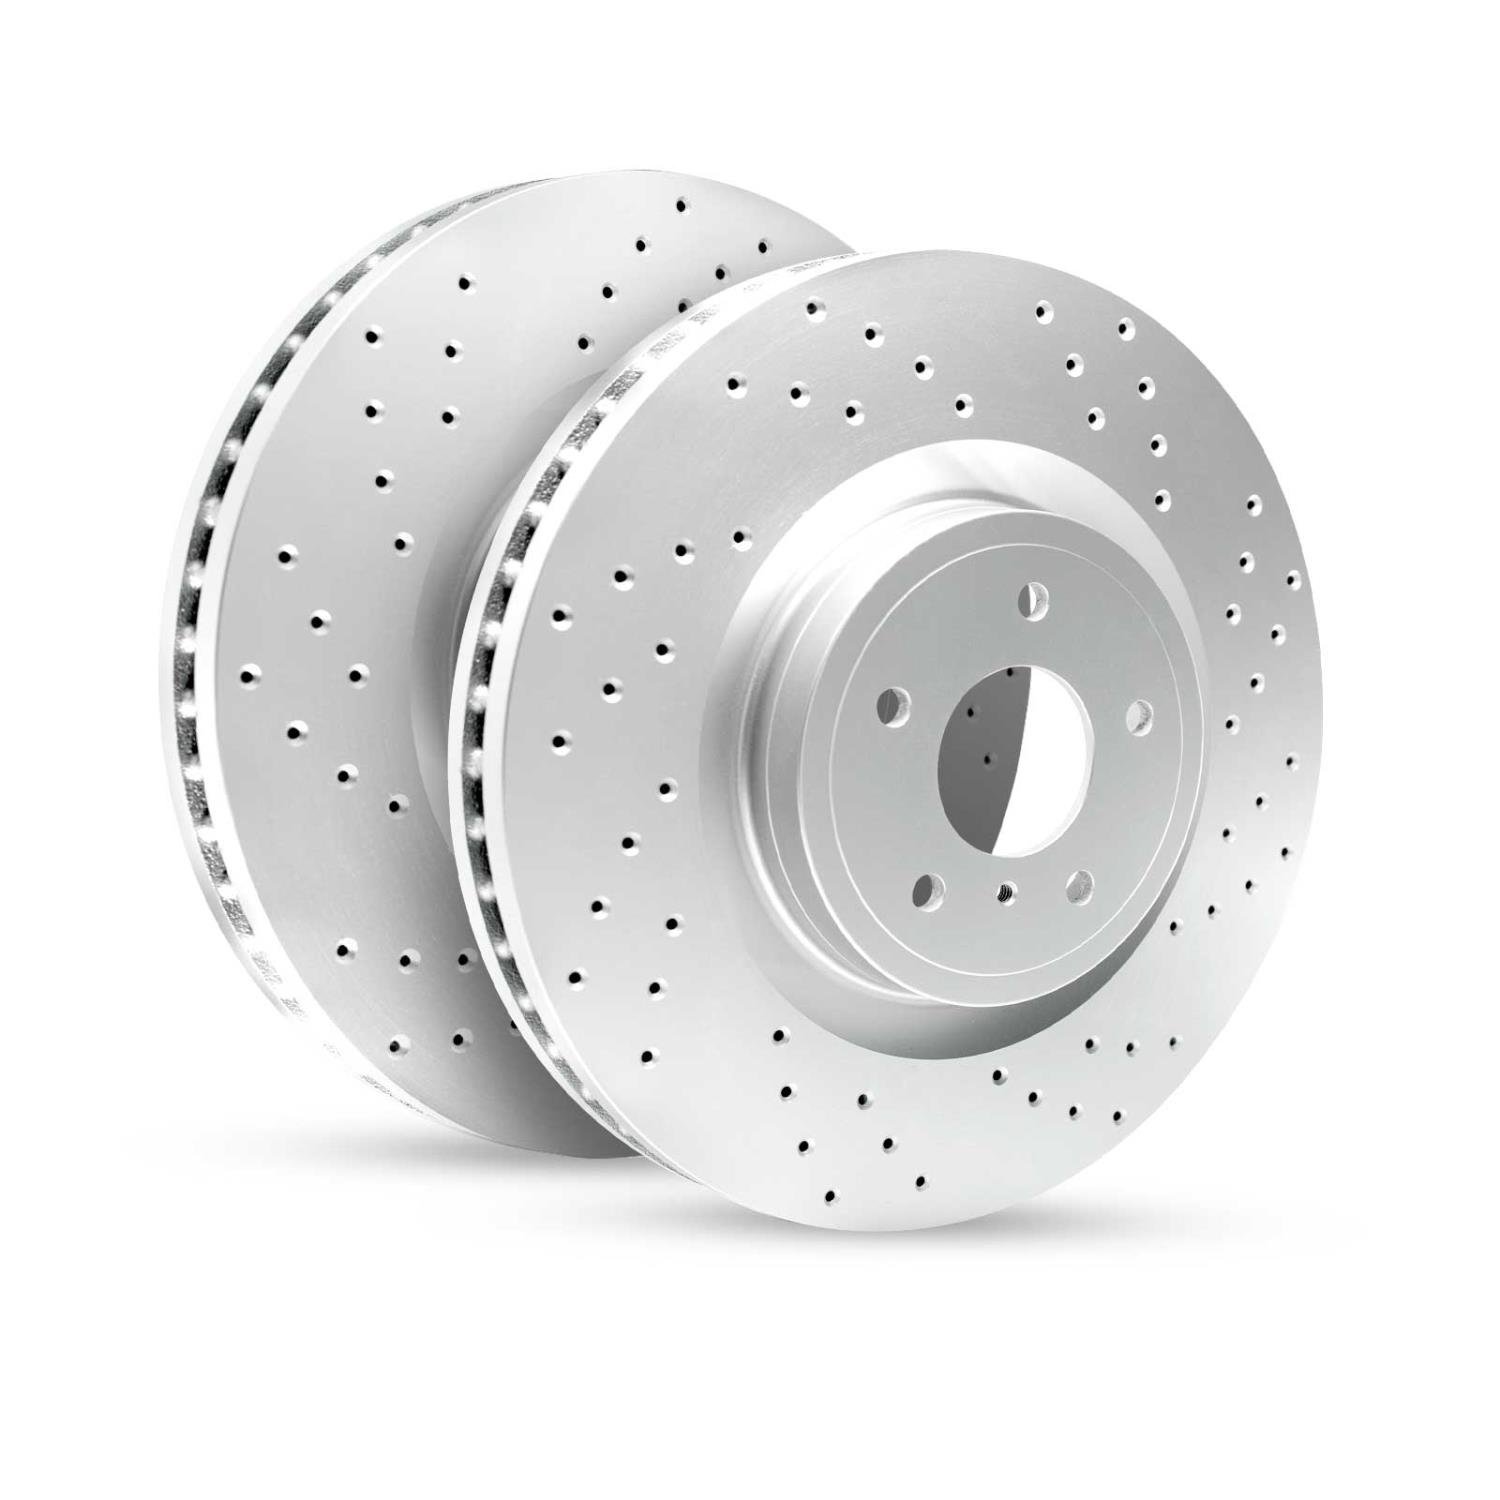 GEO-Carbon Drilled/Slotted Rotors, 1991-1999 Fits Multiple Makes/Models, Position: Rear